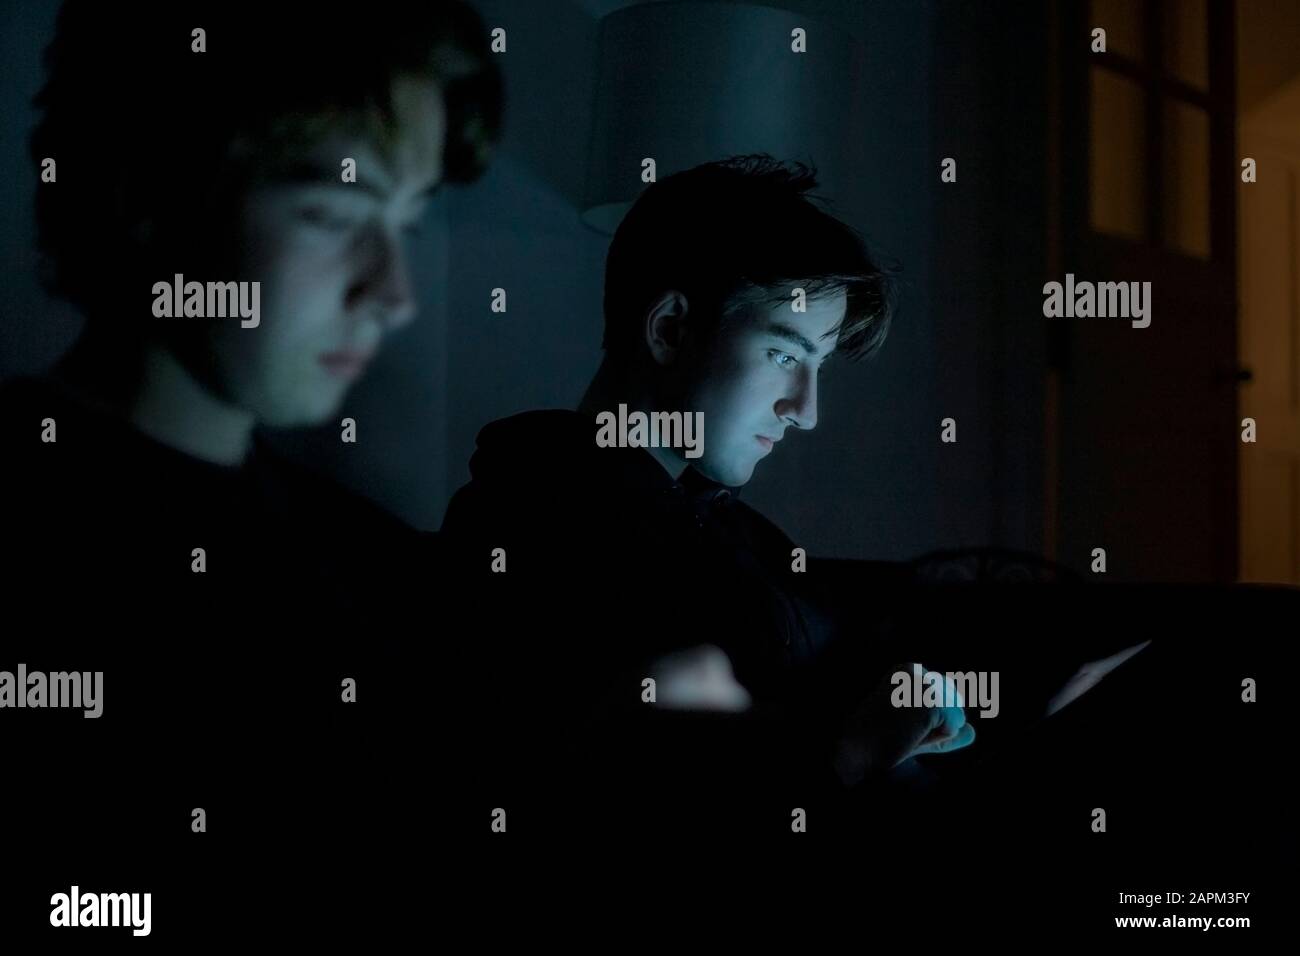 Two teenage boys using technology at home in the dark Stock Photo